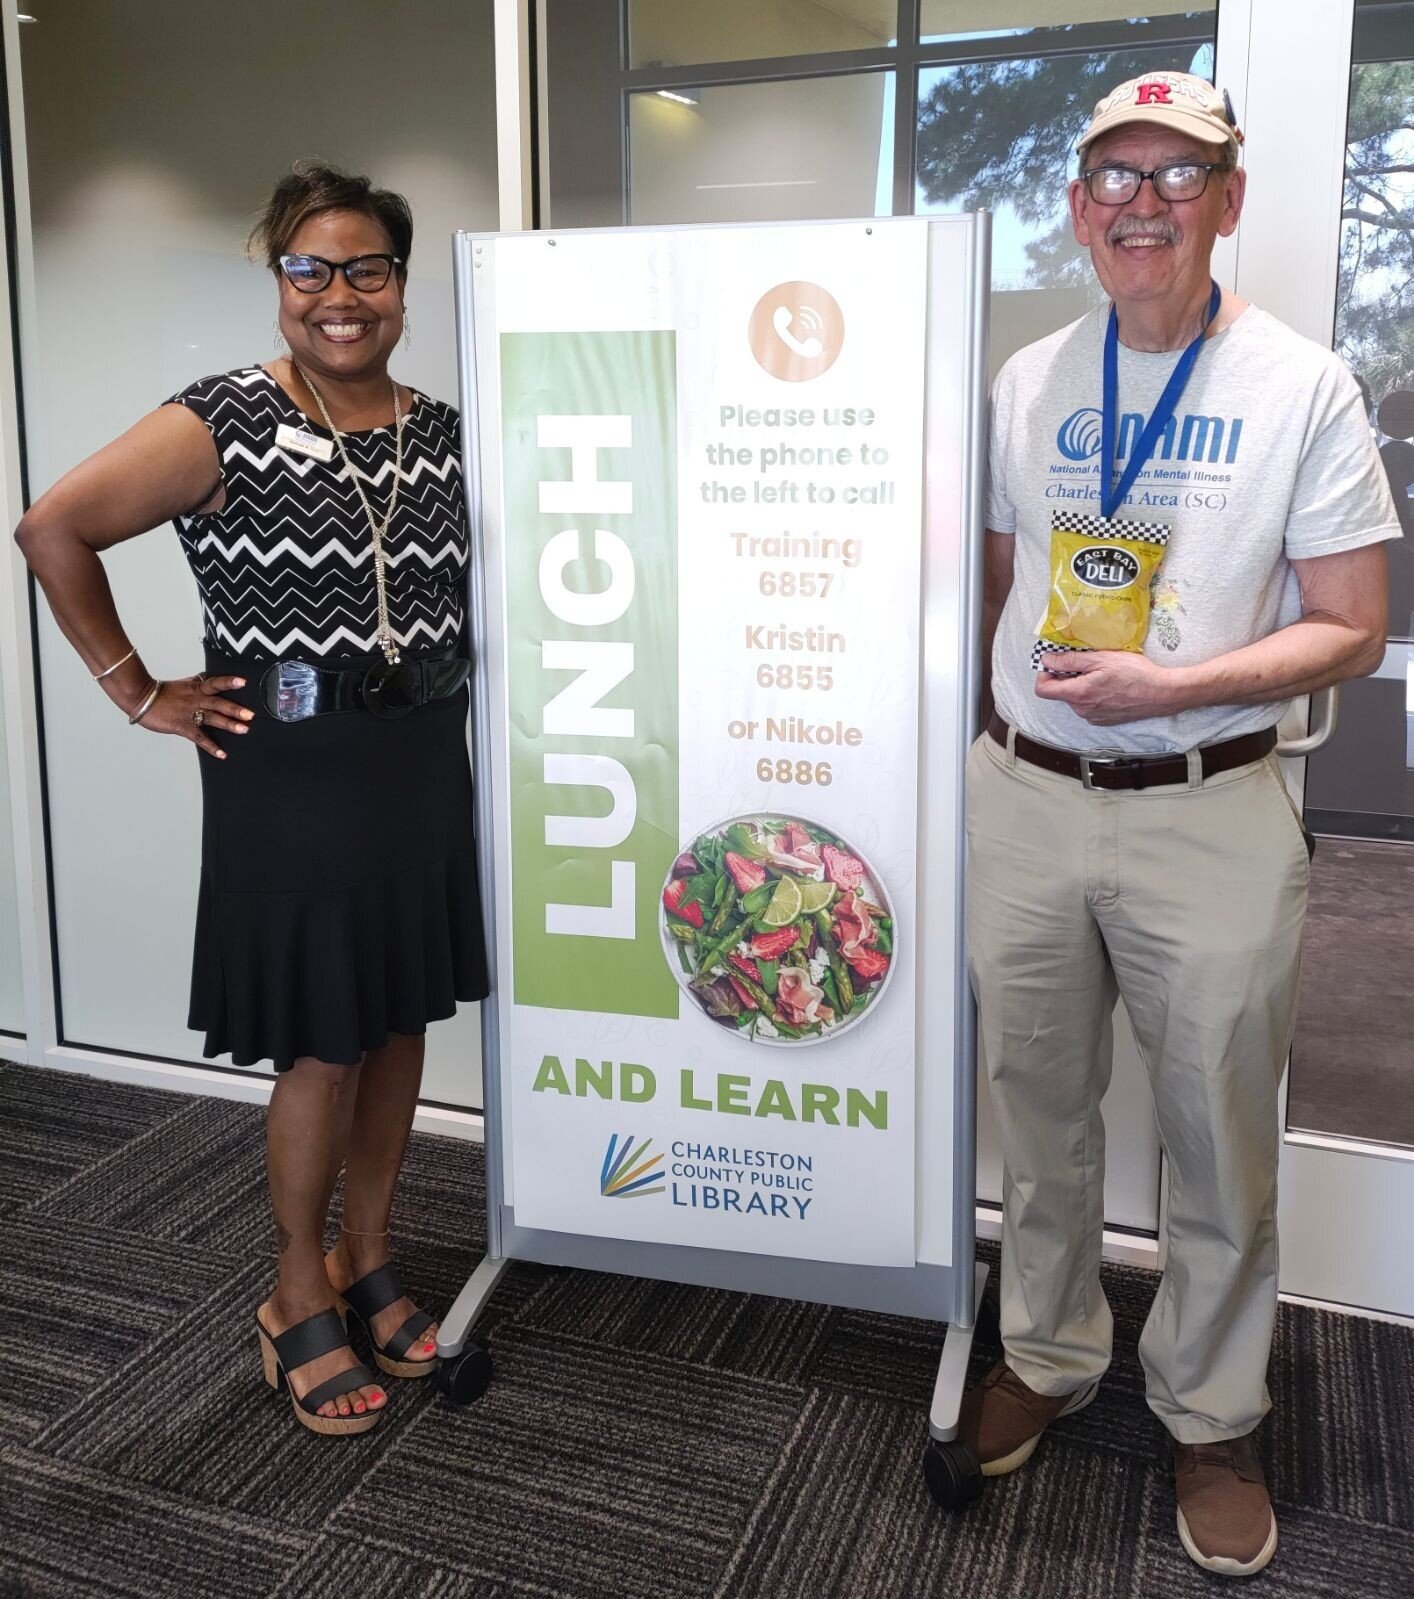 Eric Hansen and Malinda Terry participating in the 'Lunch and Learn' session at Charleston County Public Library Administrative Services, where they delved into important discussions about mental health. ⁠
⁠
Let's make a difference, one conversation 